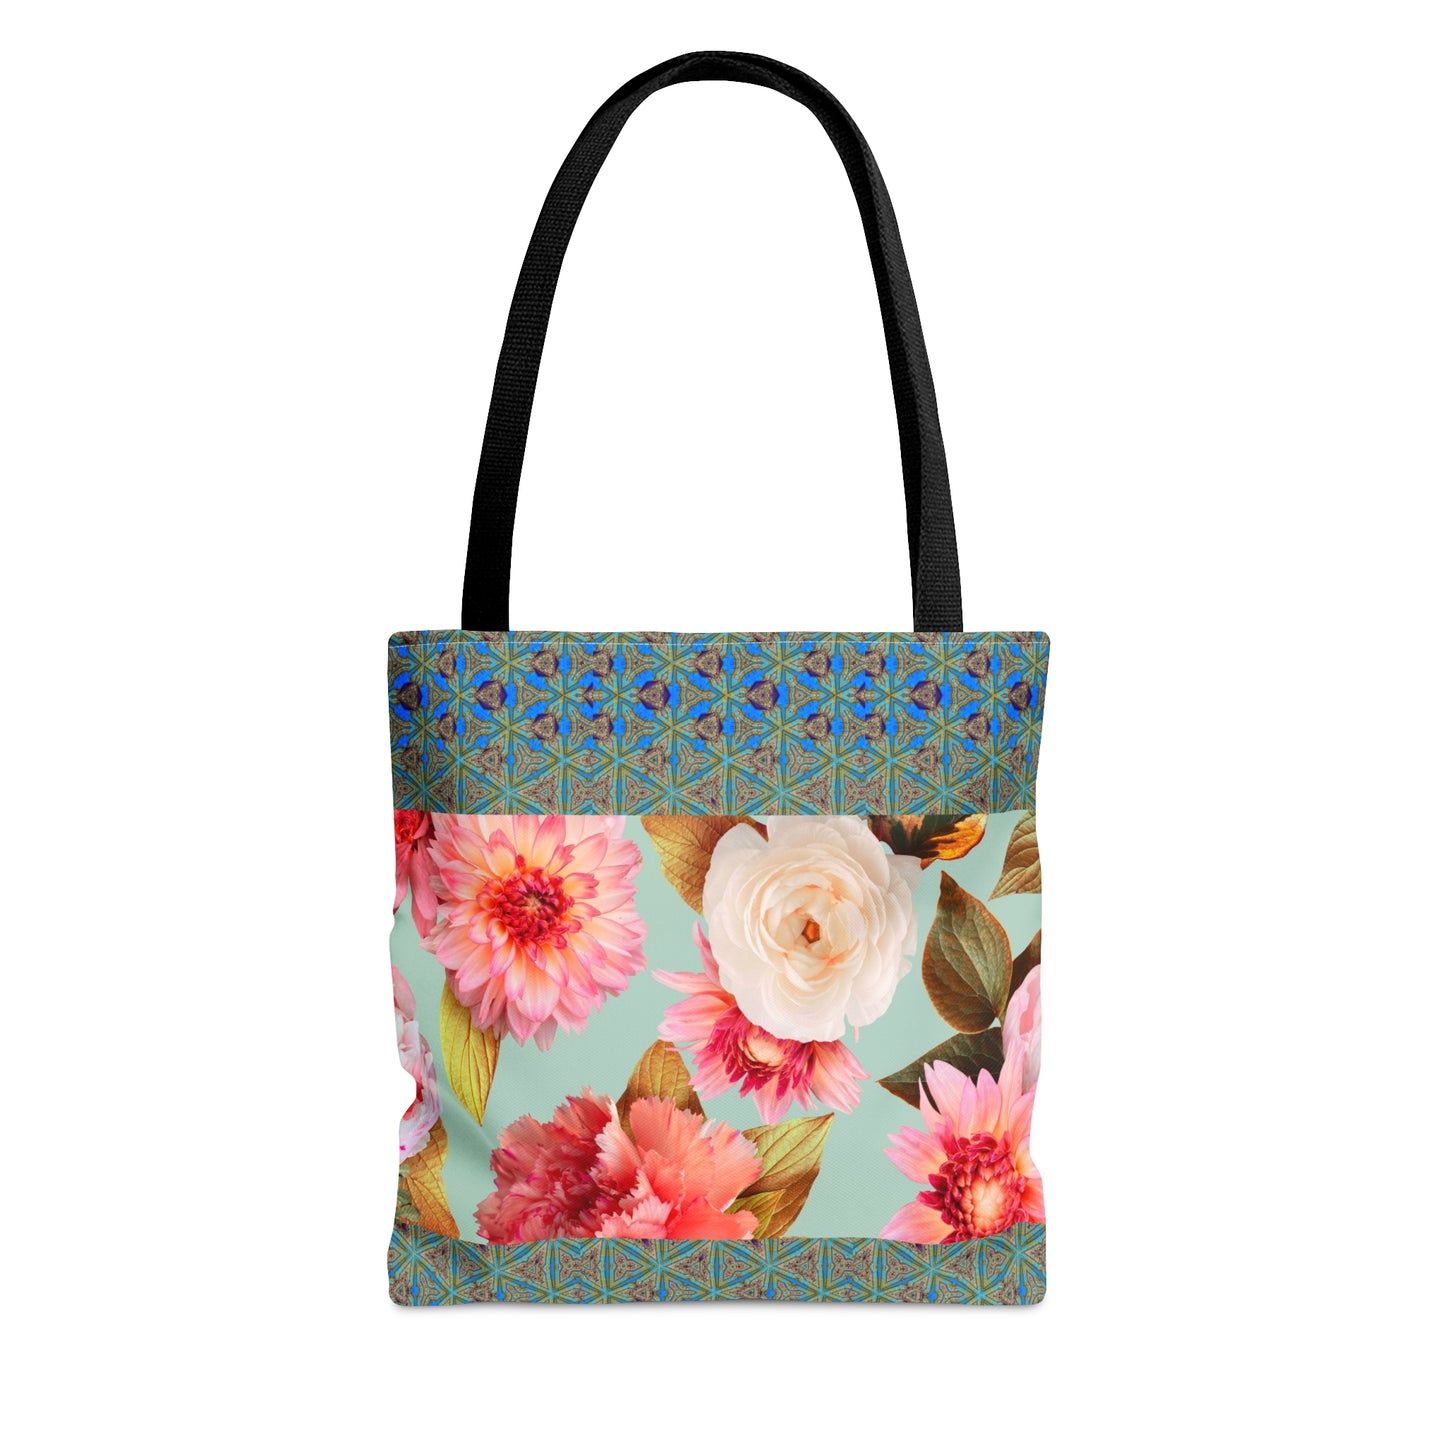 Chic Floral Tote Bag